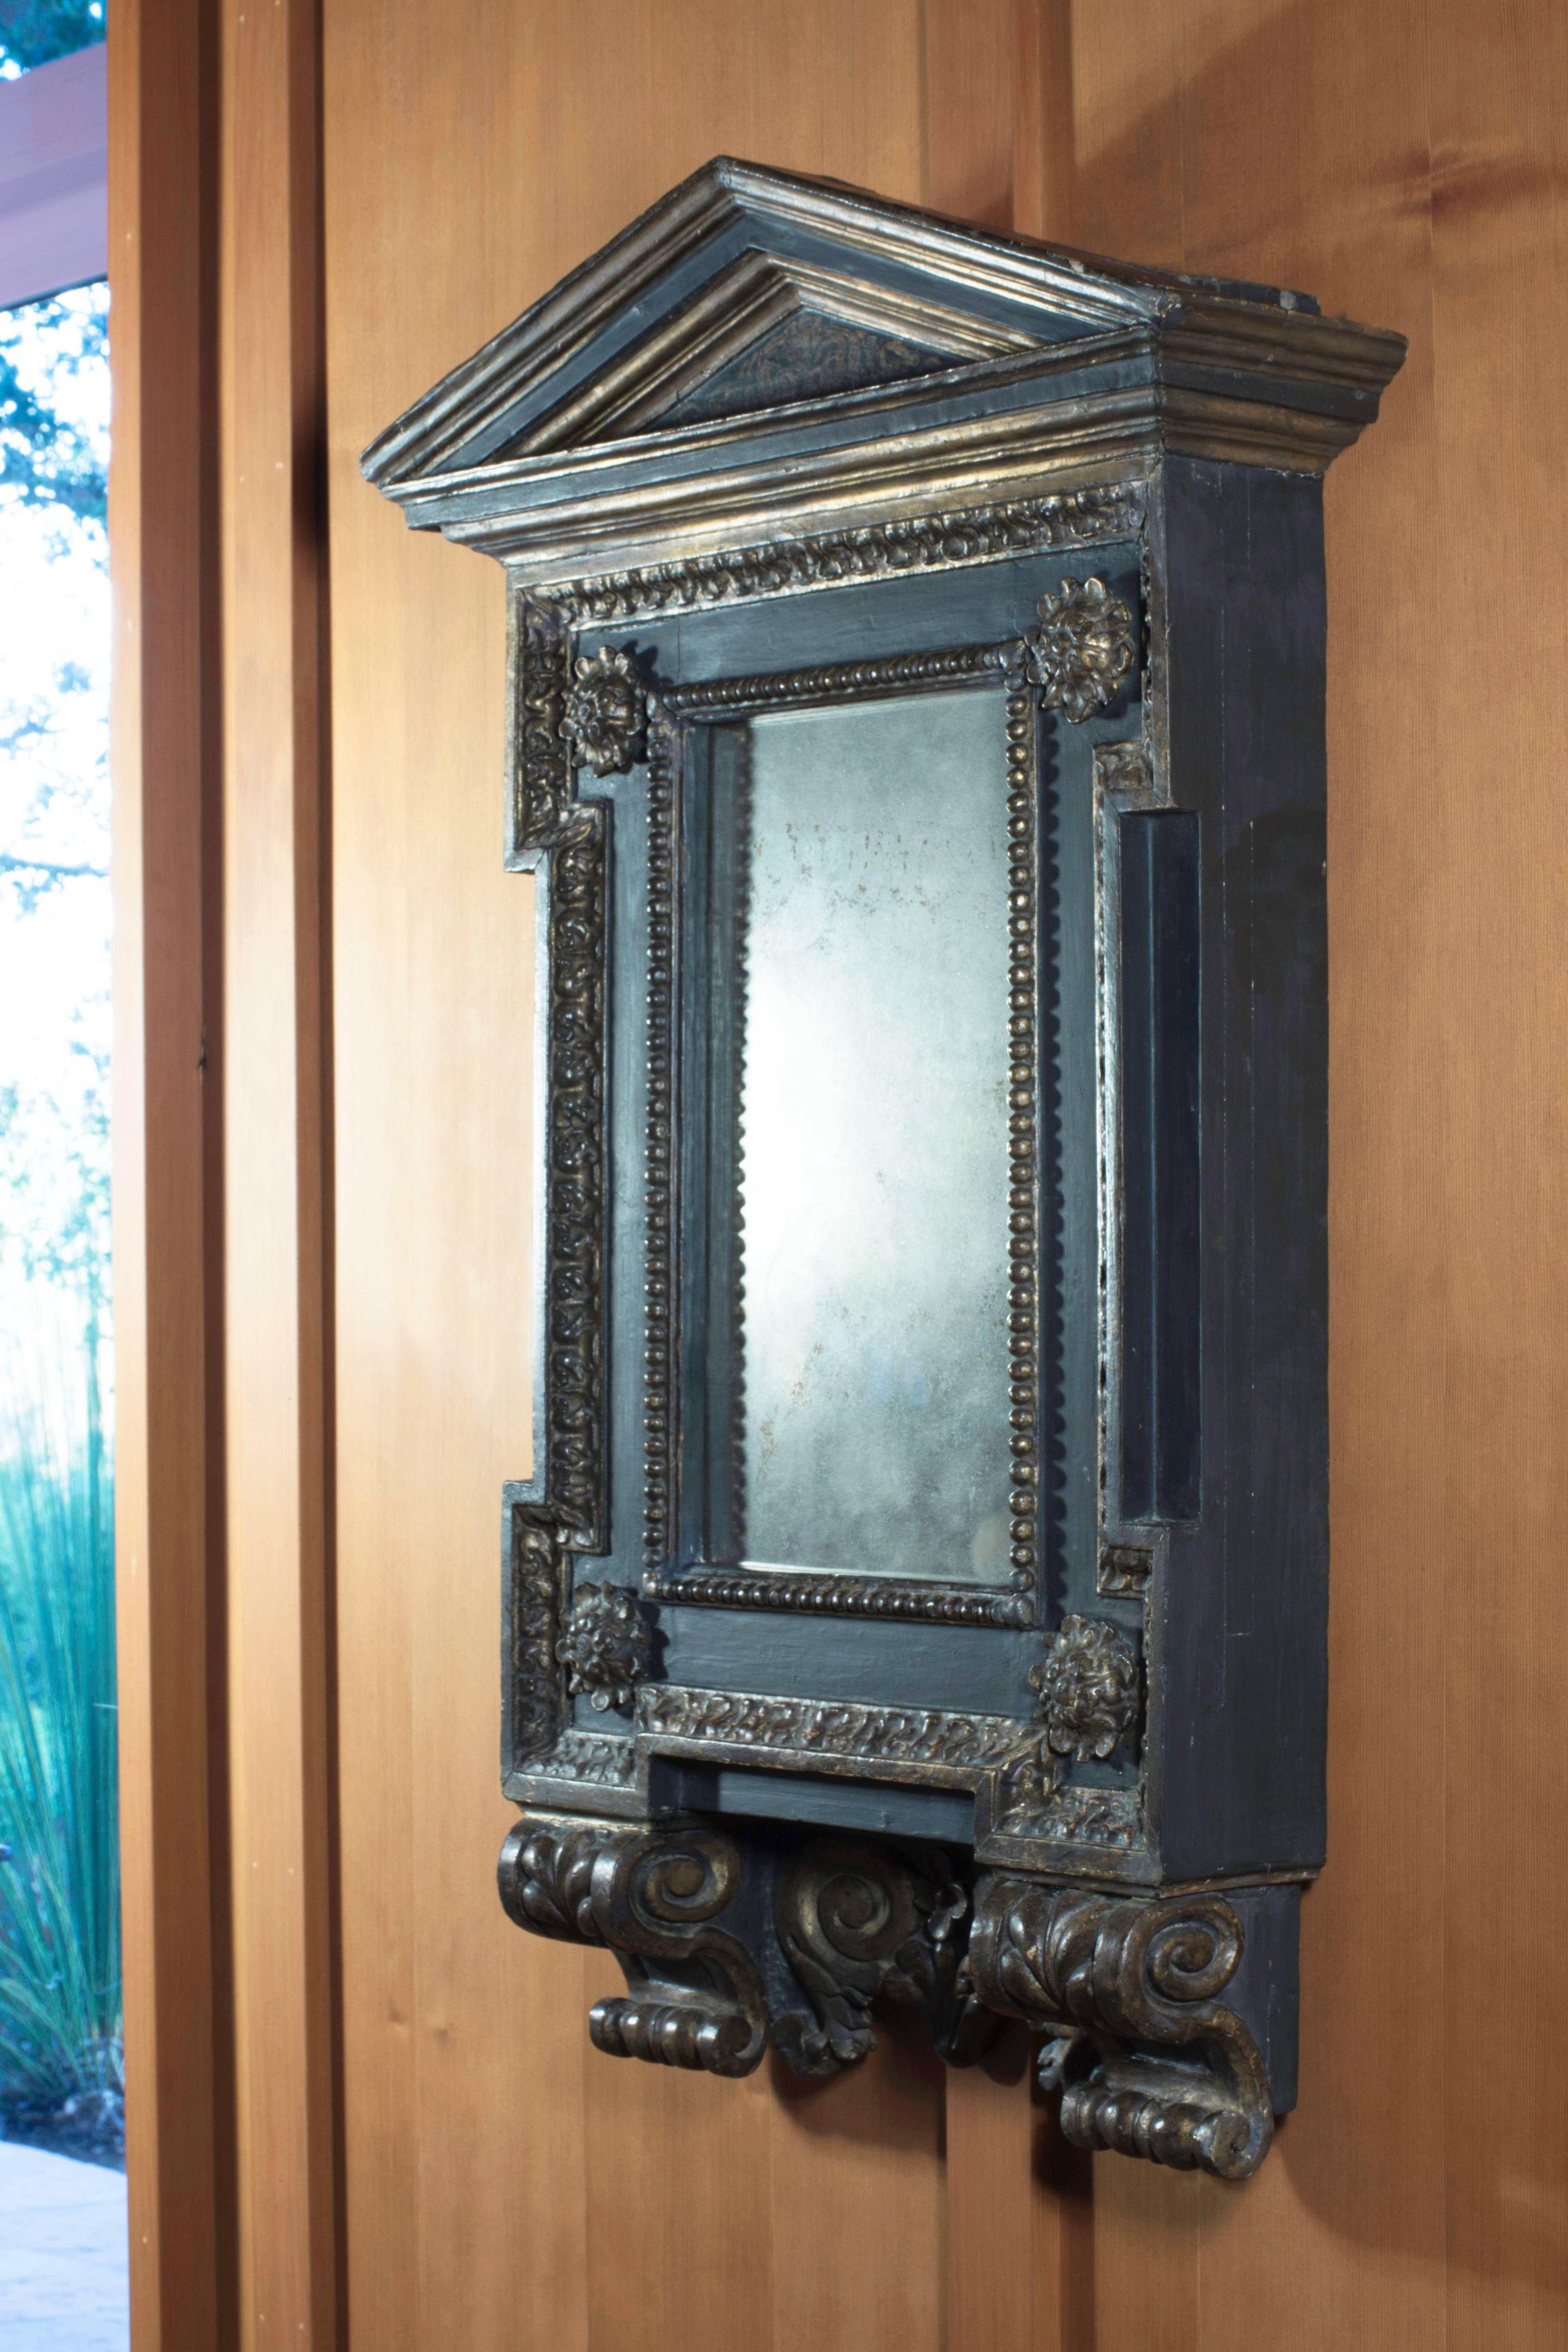 We were drawn to this handsome carved, painted and gilded mirror from the collection of David Abbato especially for its affinities to door and window surrounds designed by our favorite Renaissance architects. Attached, for example, is an image of